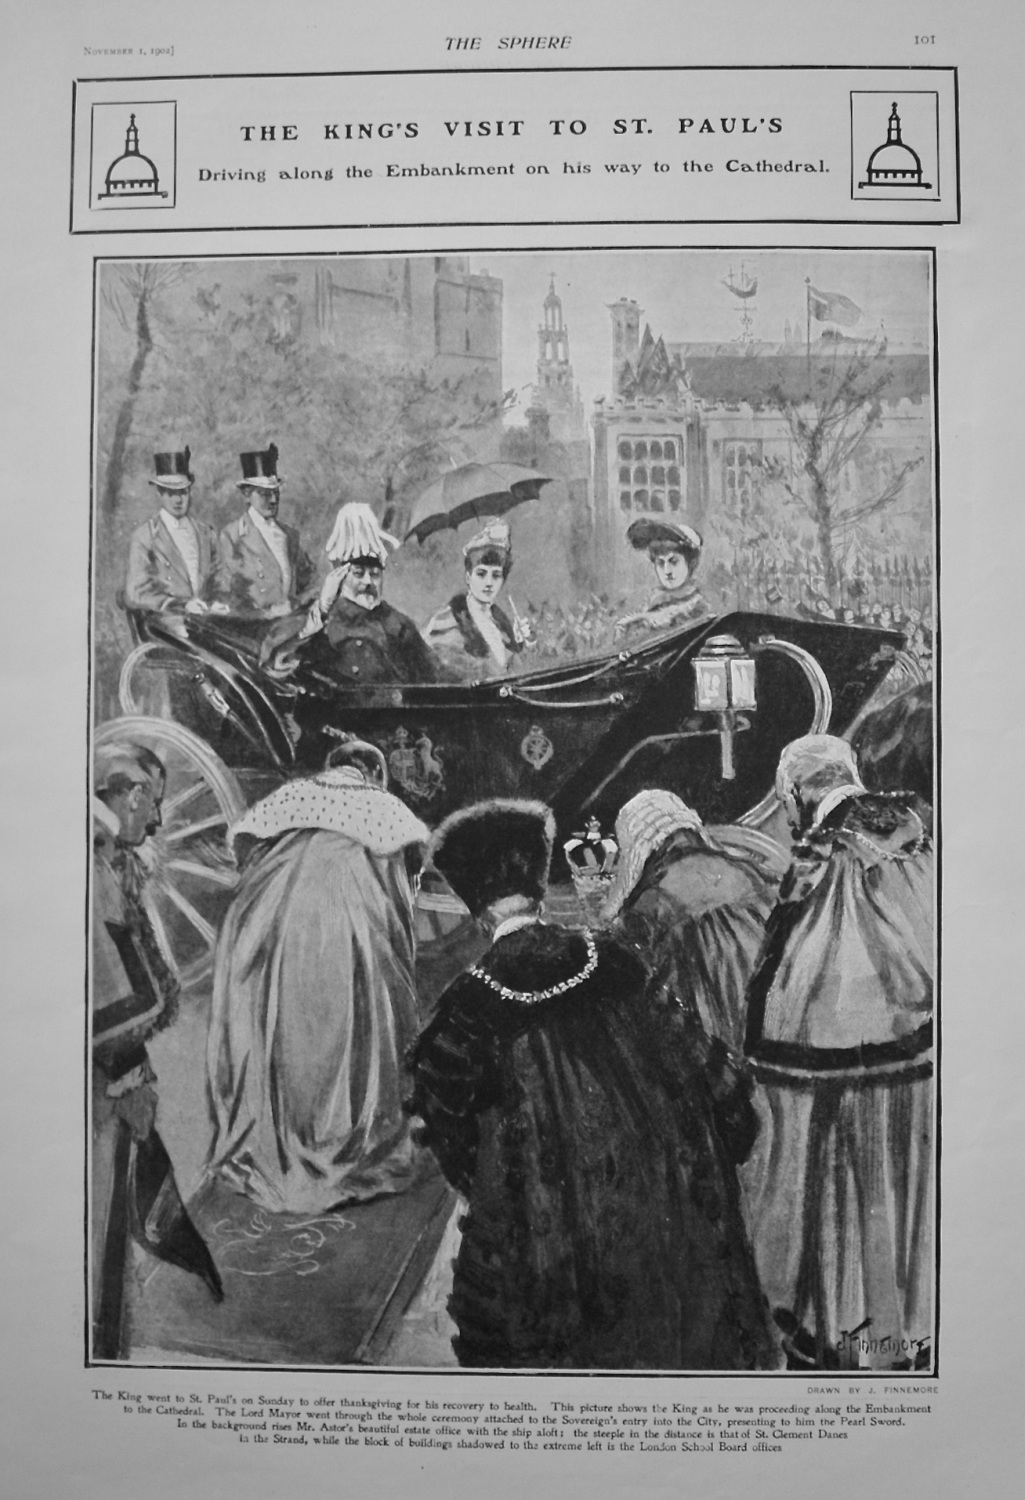 The King's Visit to St. Paul's - Driving along the Embankment on his way to